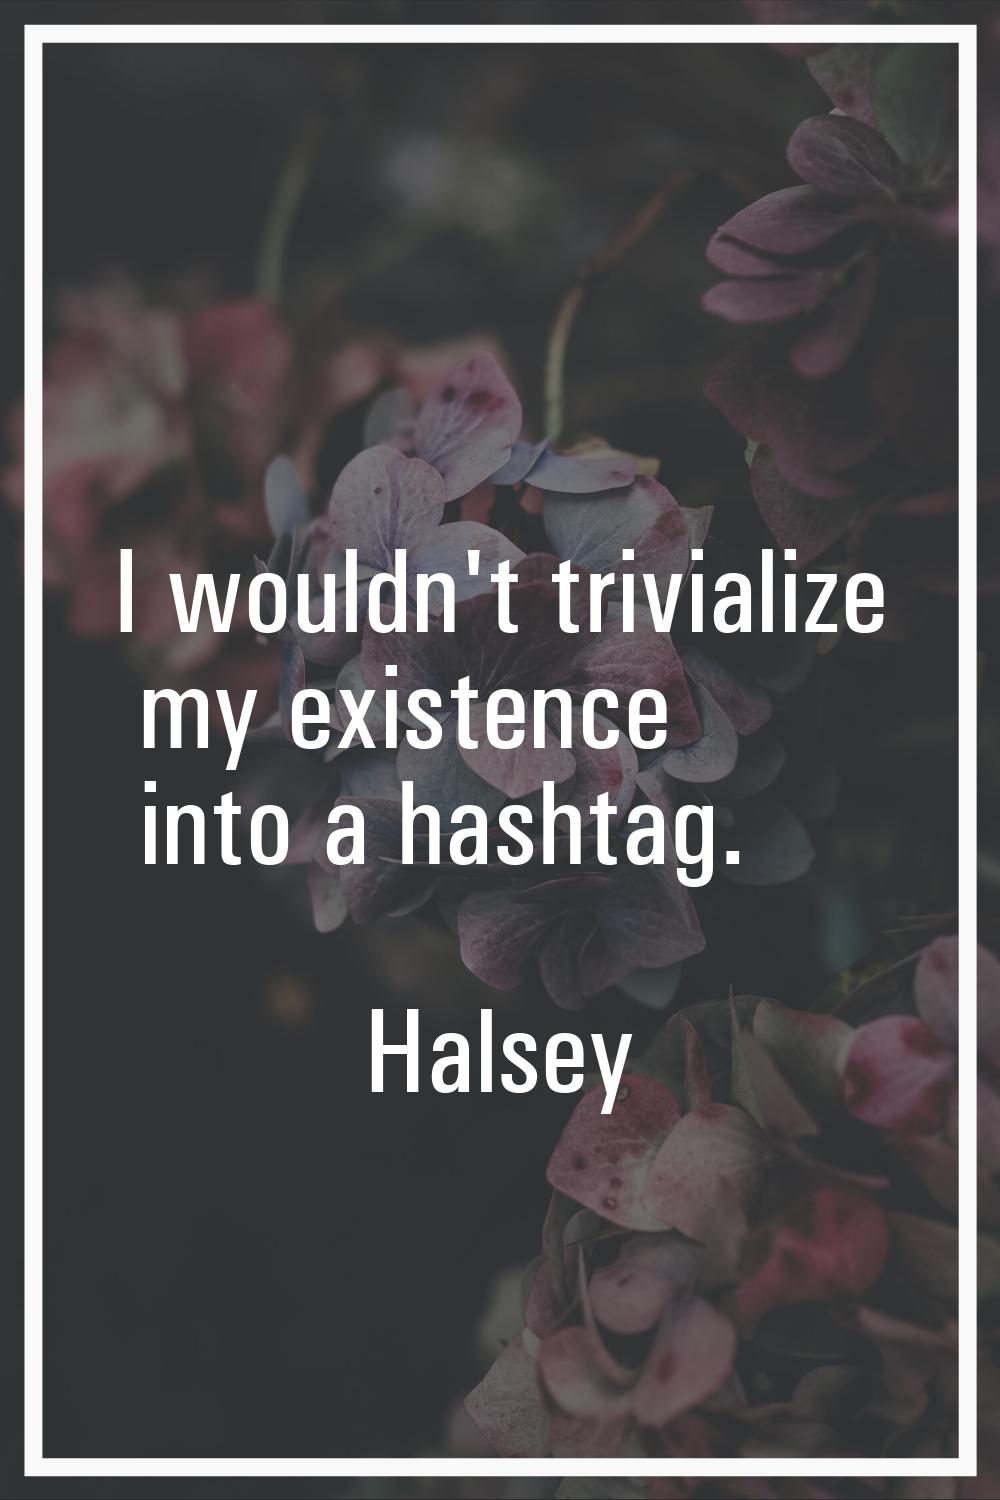 I wouldn't trivialize my existence into a hashtag.